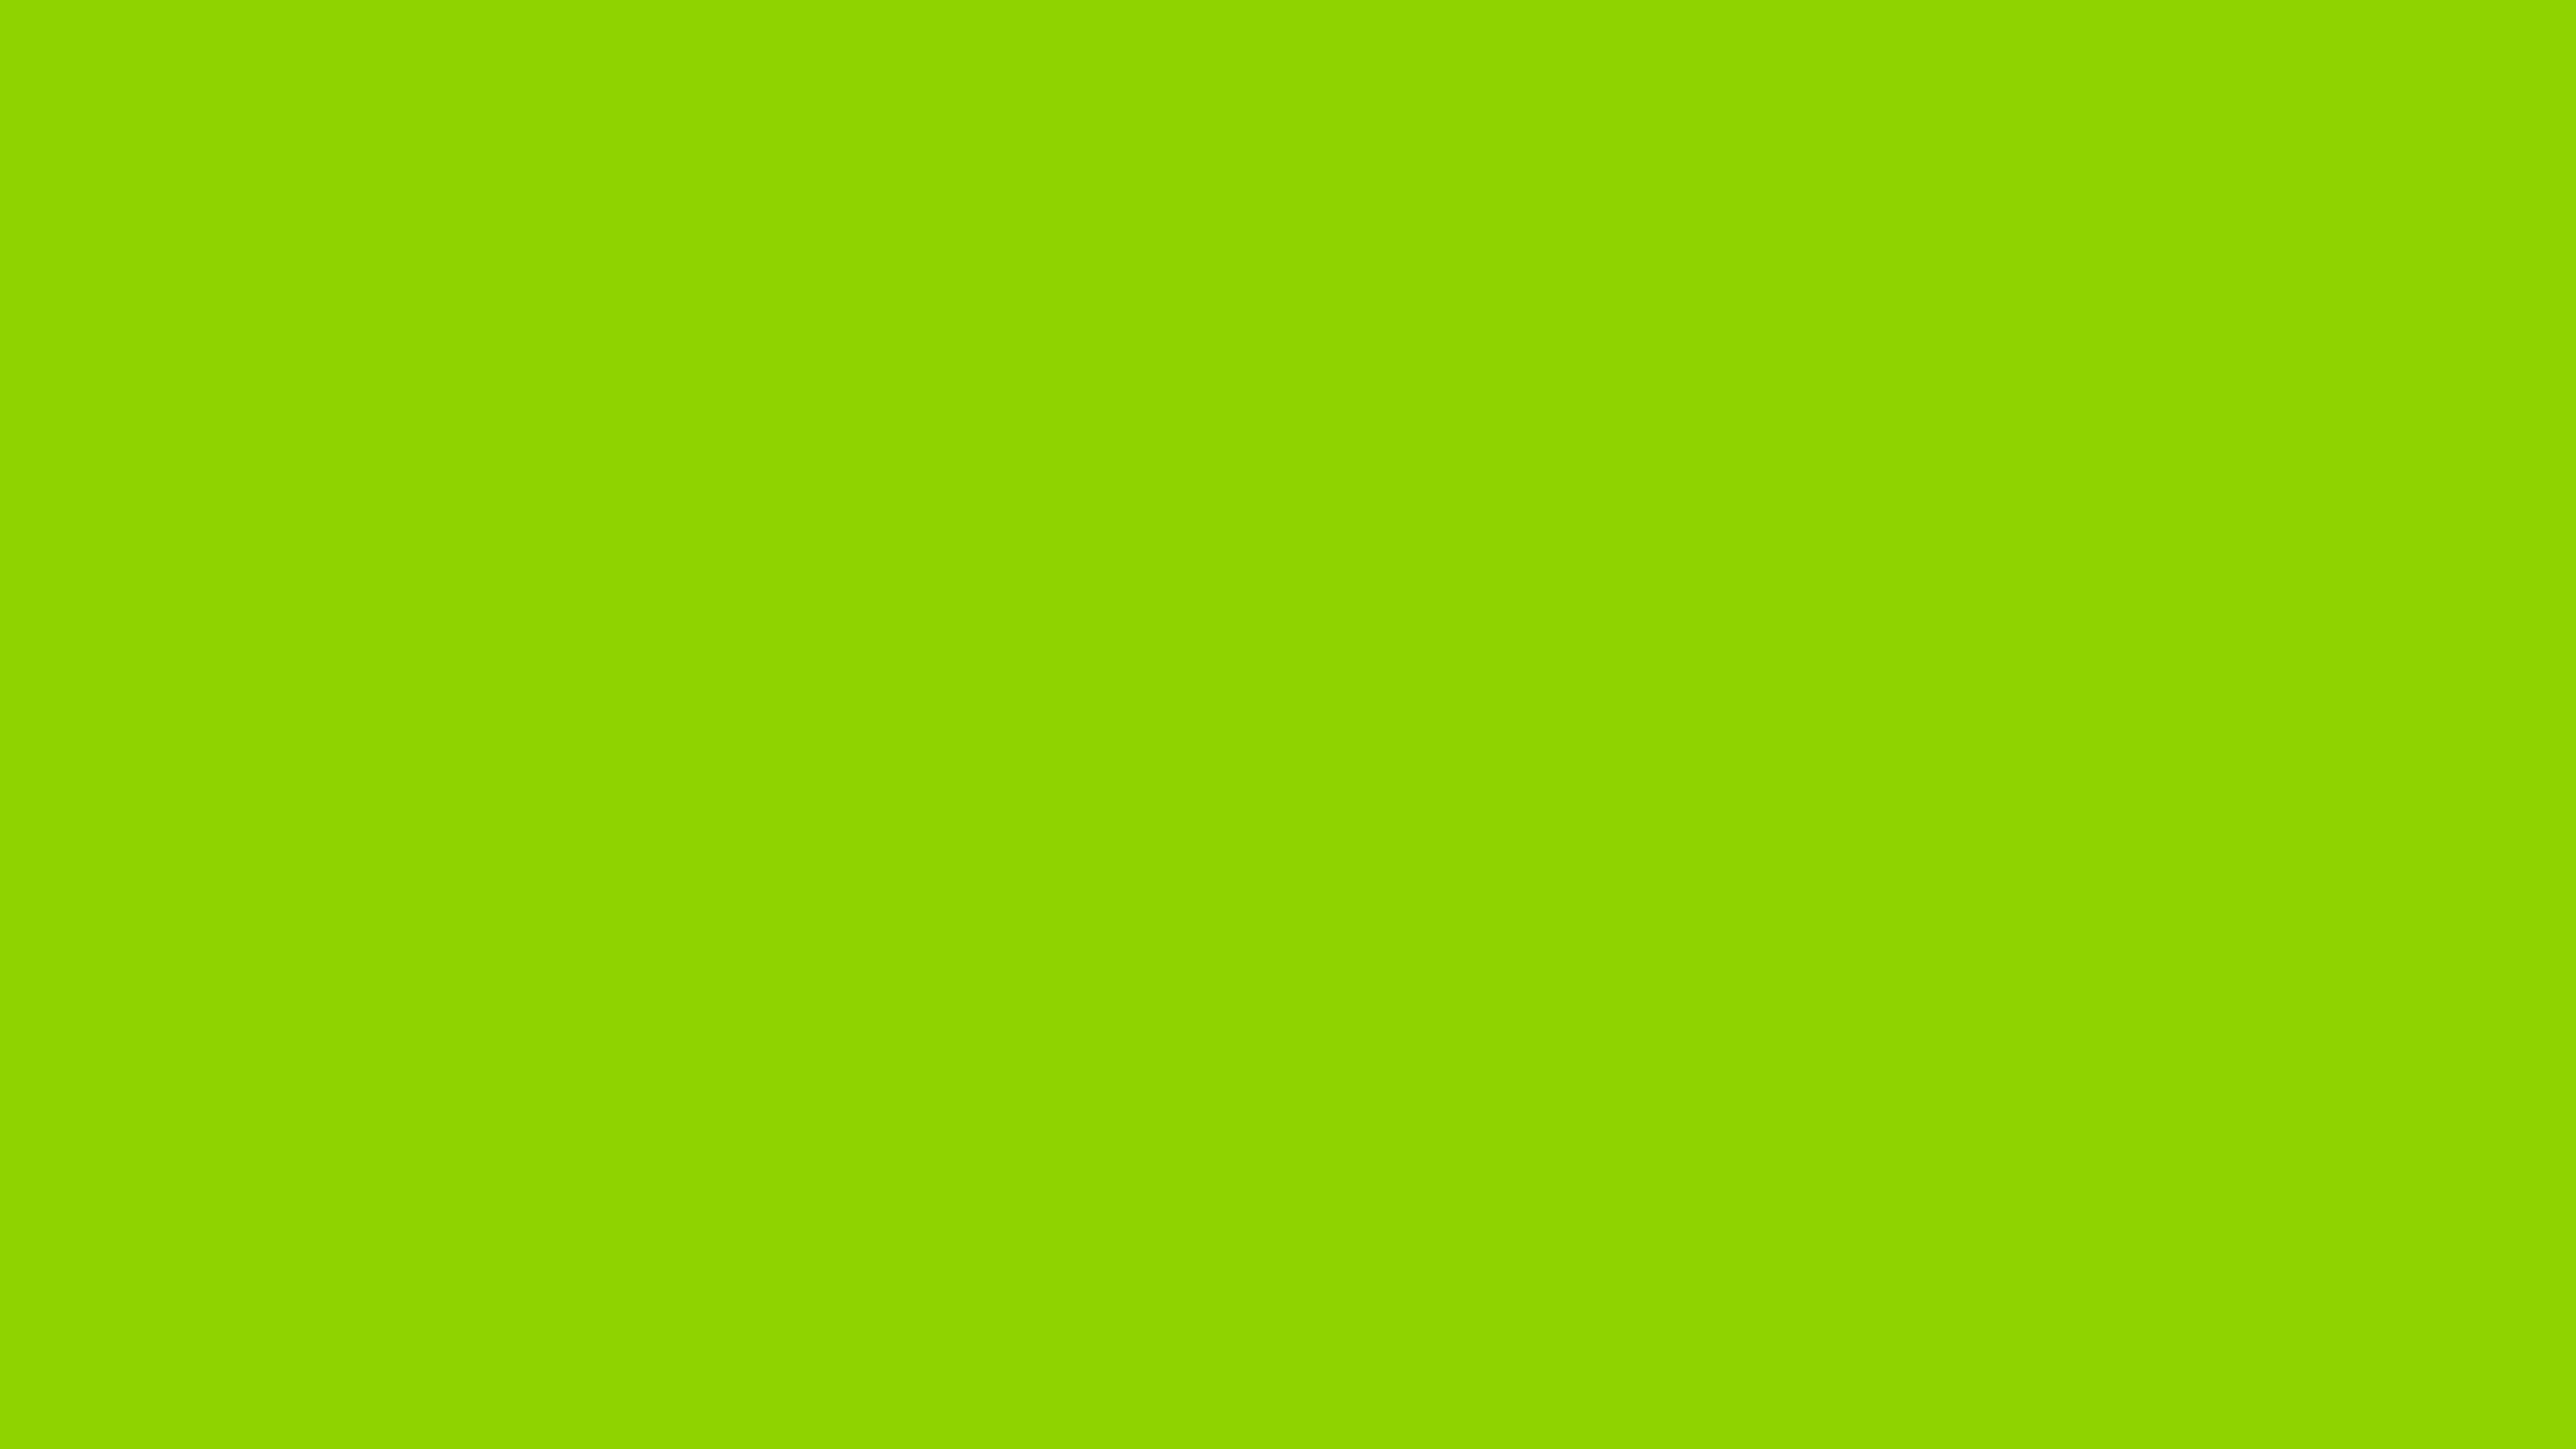 7680x4320 Sheen Green Solid Color Background